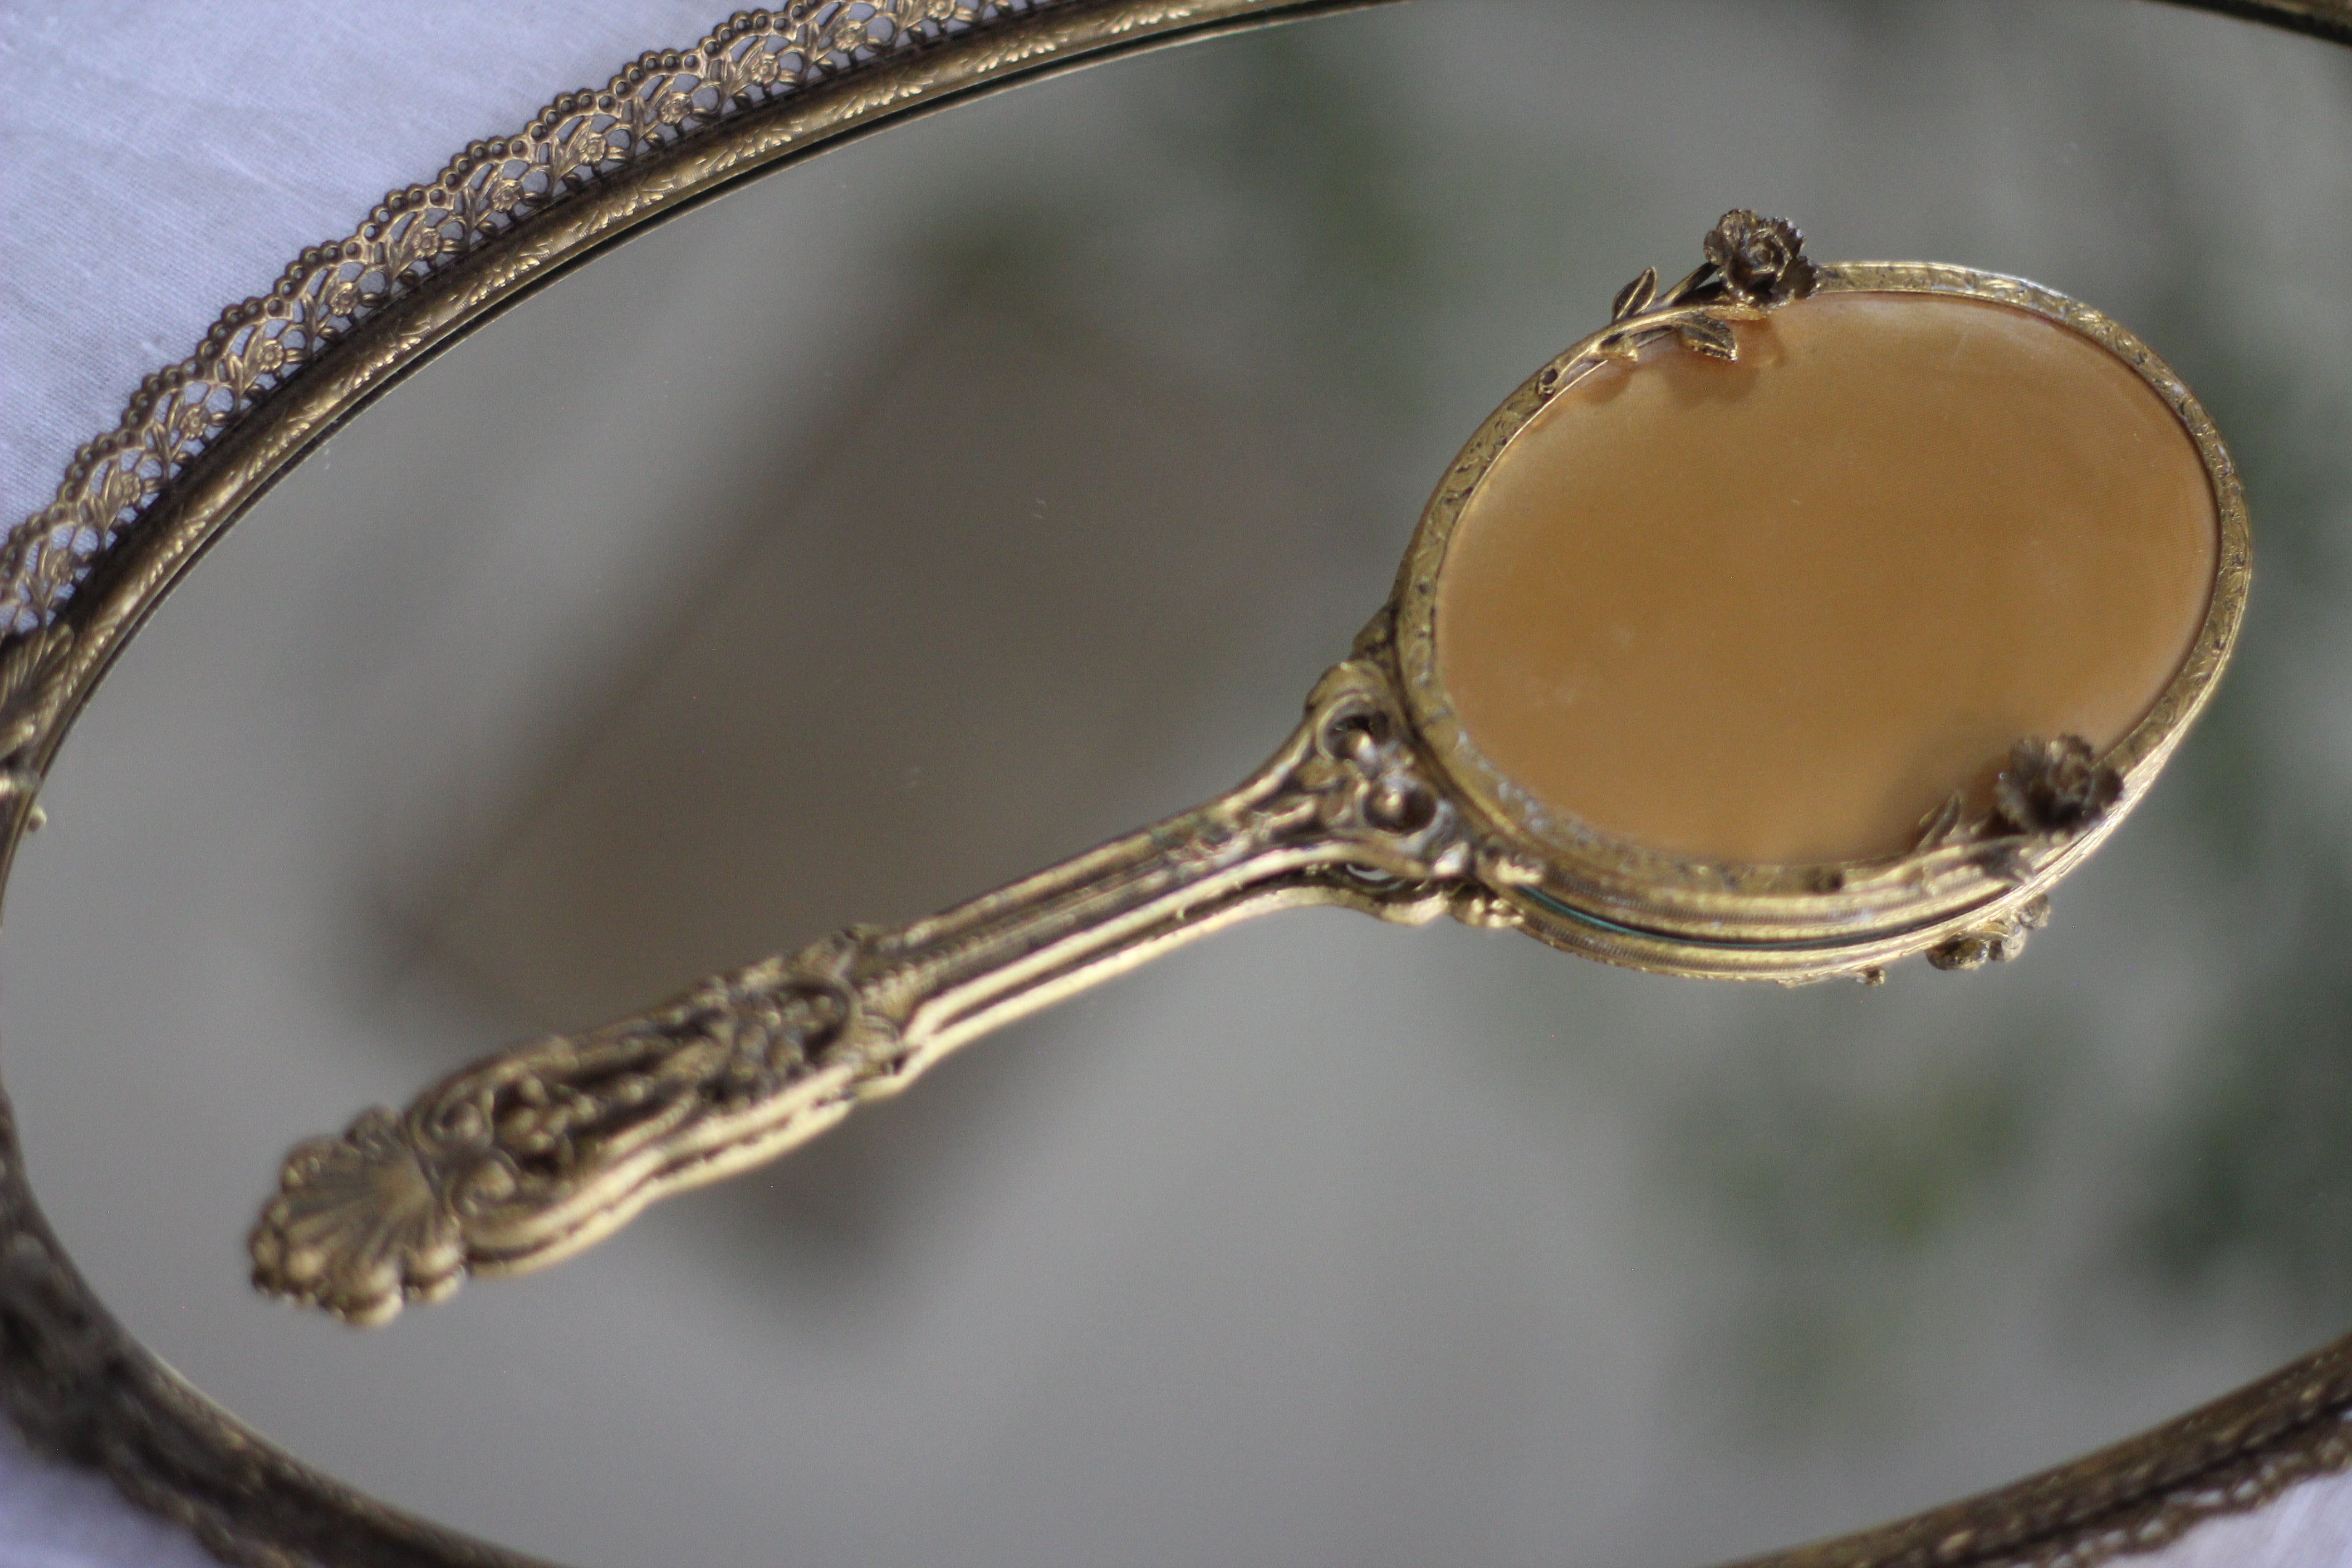 Antique Small Floral Hand Mirror